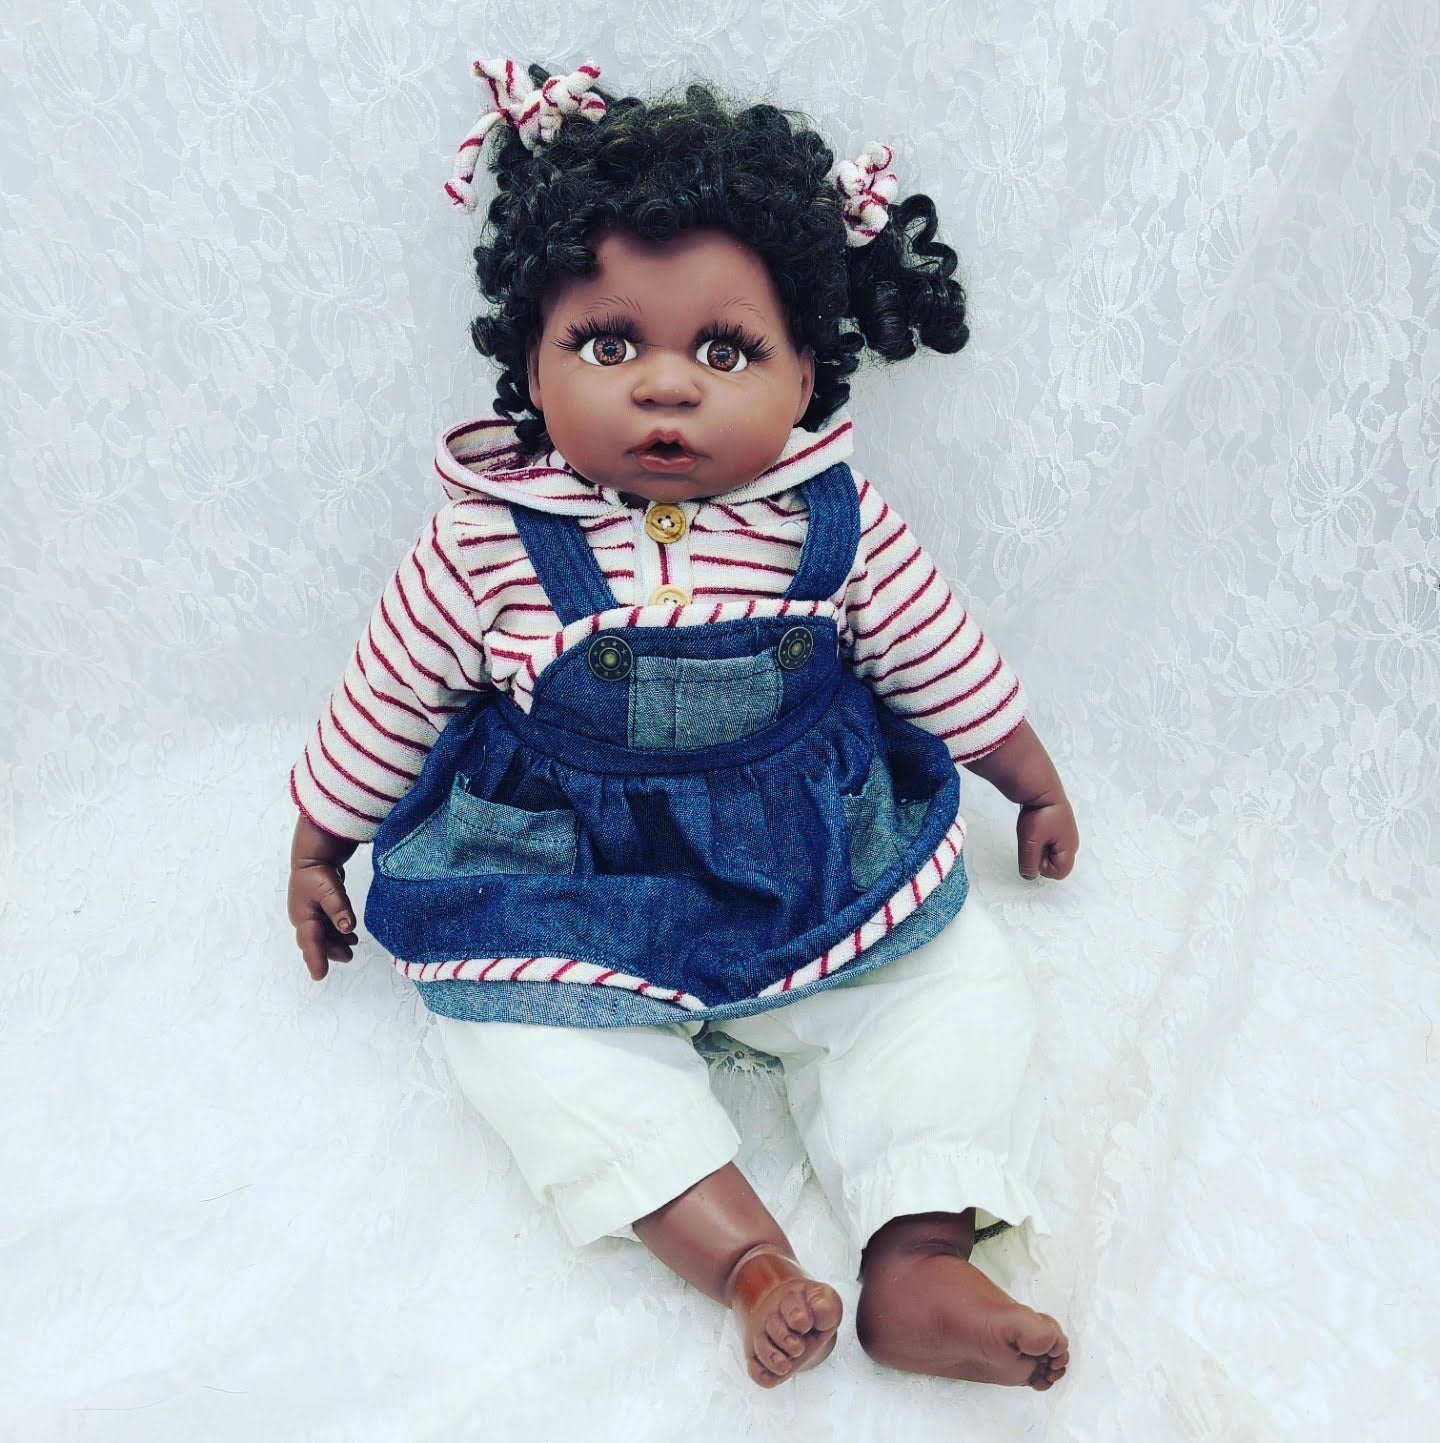 SALE! Danya Haunted Doll ~ 23" African American Vinyl Toddler Vessel ~ Paranormal ~ Sweet Girl ~ Thinks She's Bigger Than She Is ~ Wannabe Big Sister